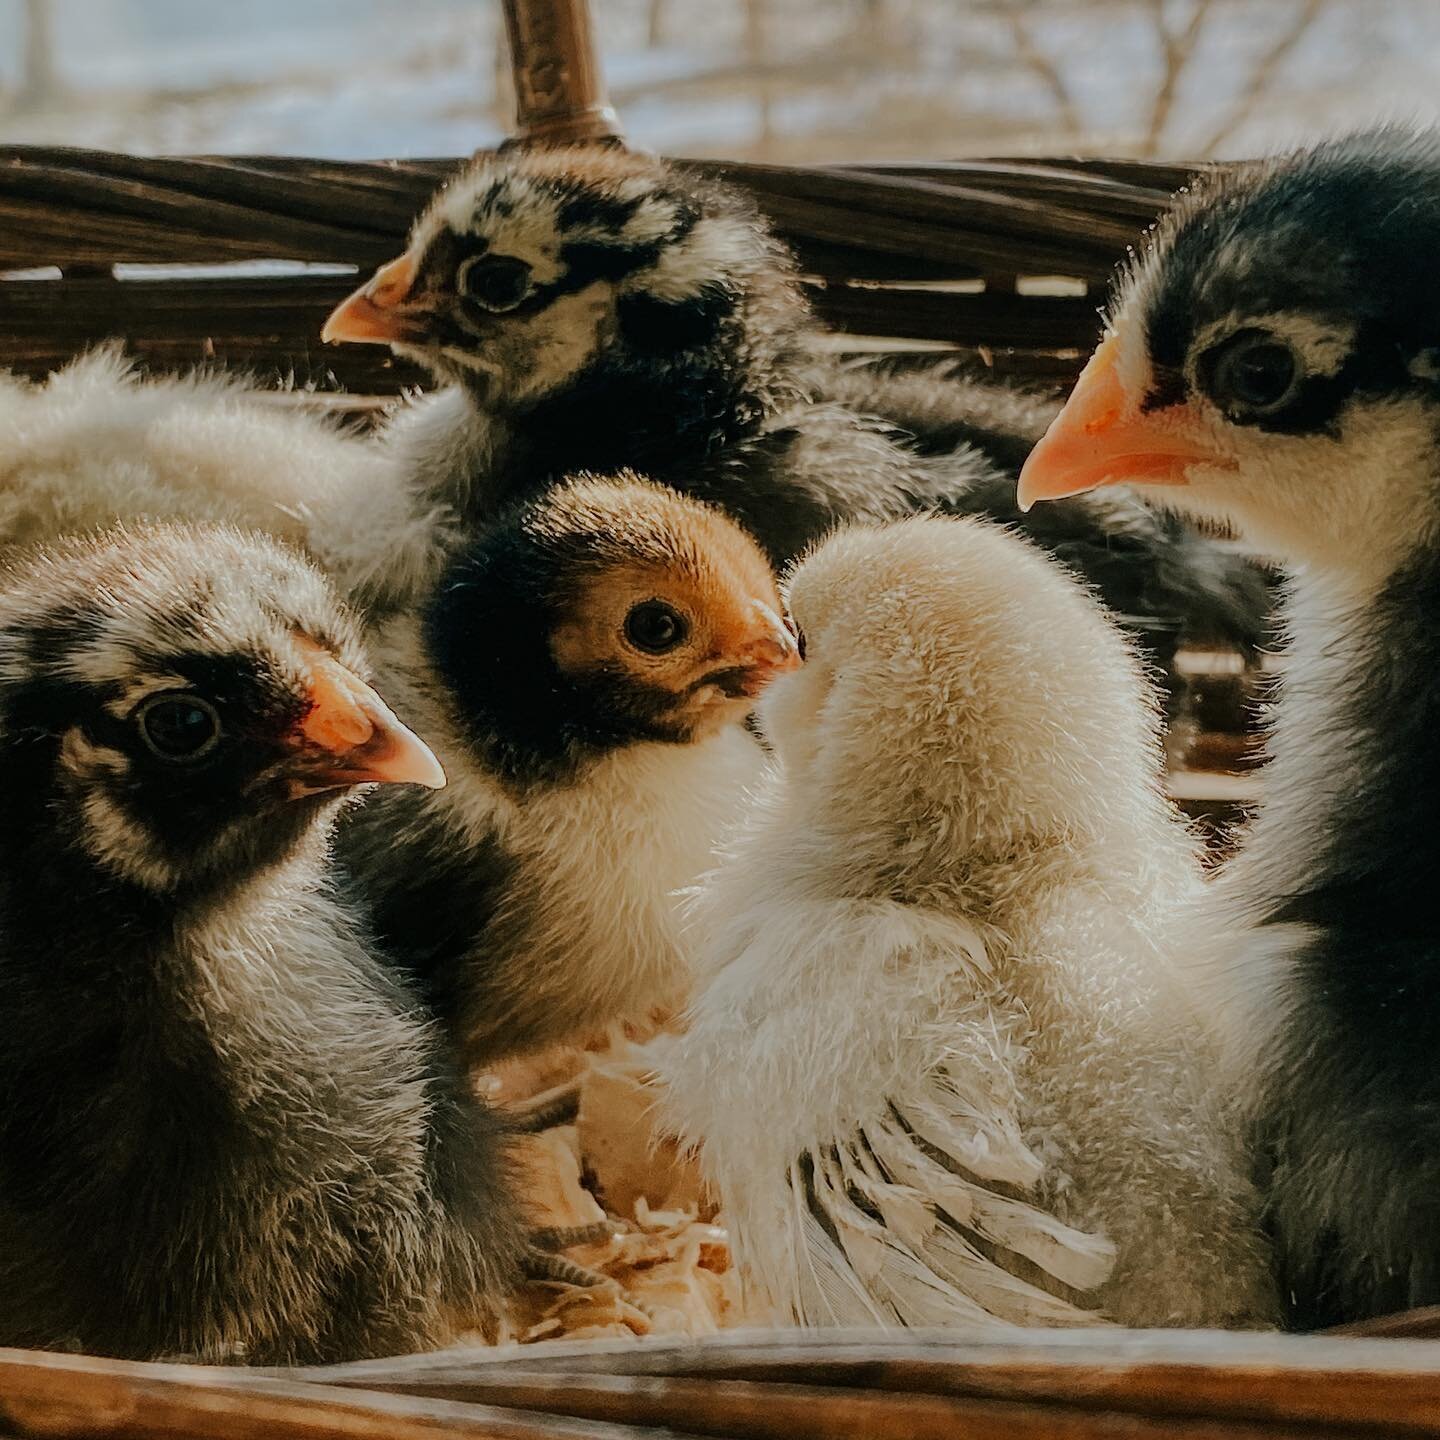 Meet our sweet baby chicks! 🐥 Almost a week old and oh so fluffy - can't wait to see their variety as they grow!

Bantam Chickens, each a different color

#chickdays #babychicksofinstagram #ilovechickens #bantamchicken